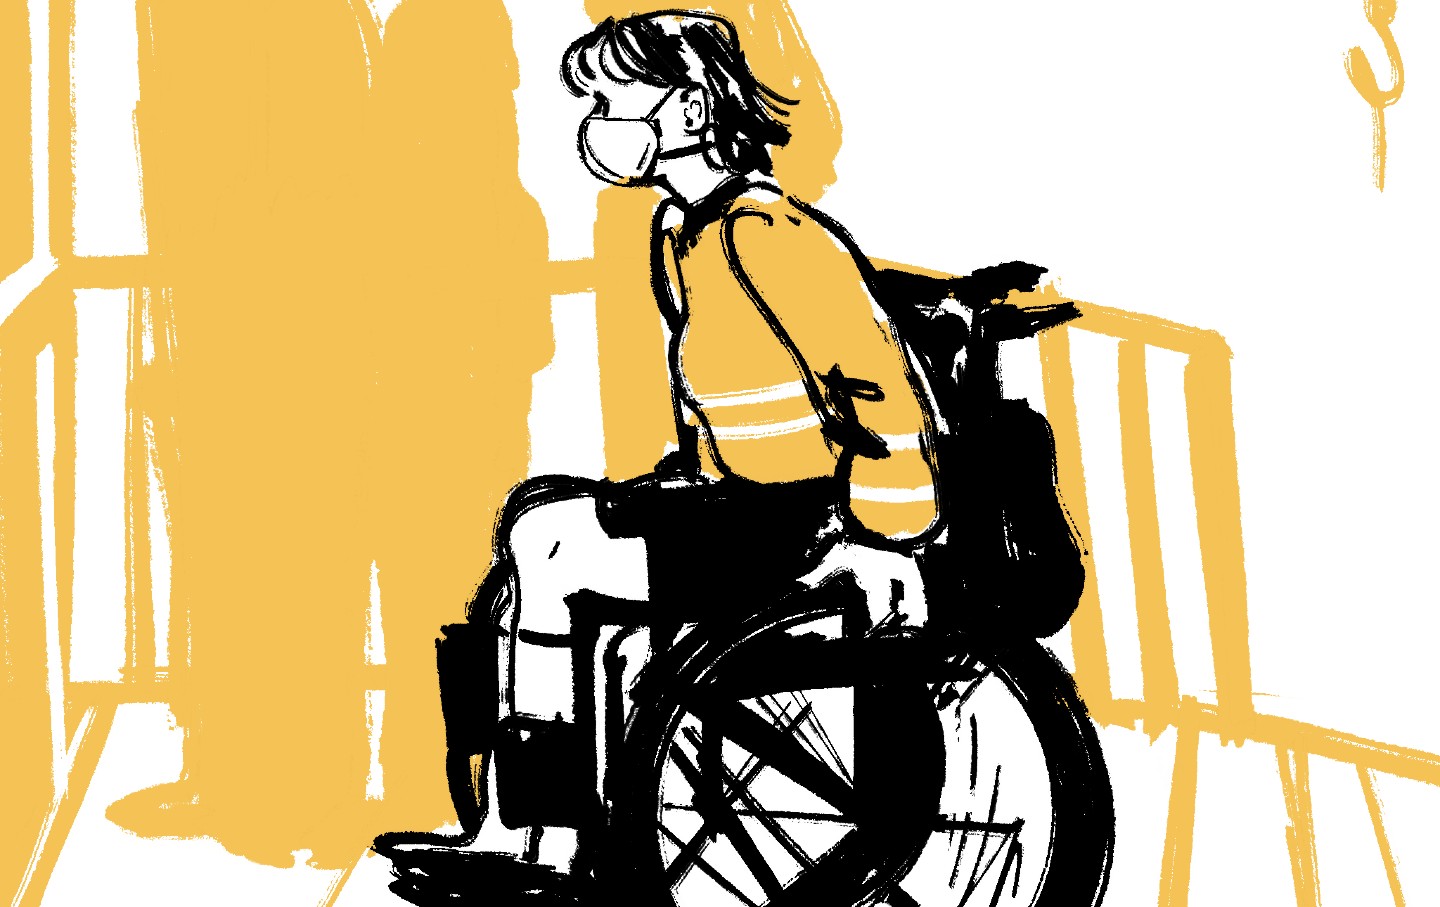 An illustration of a wheel-chair user.